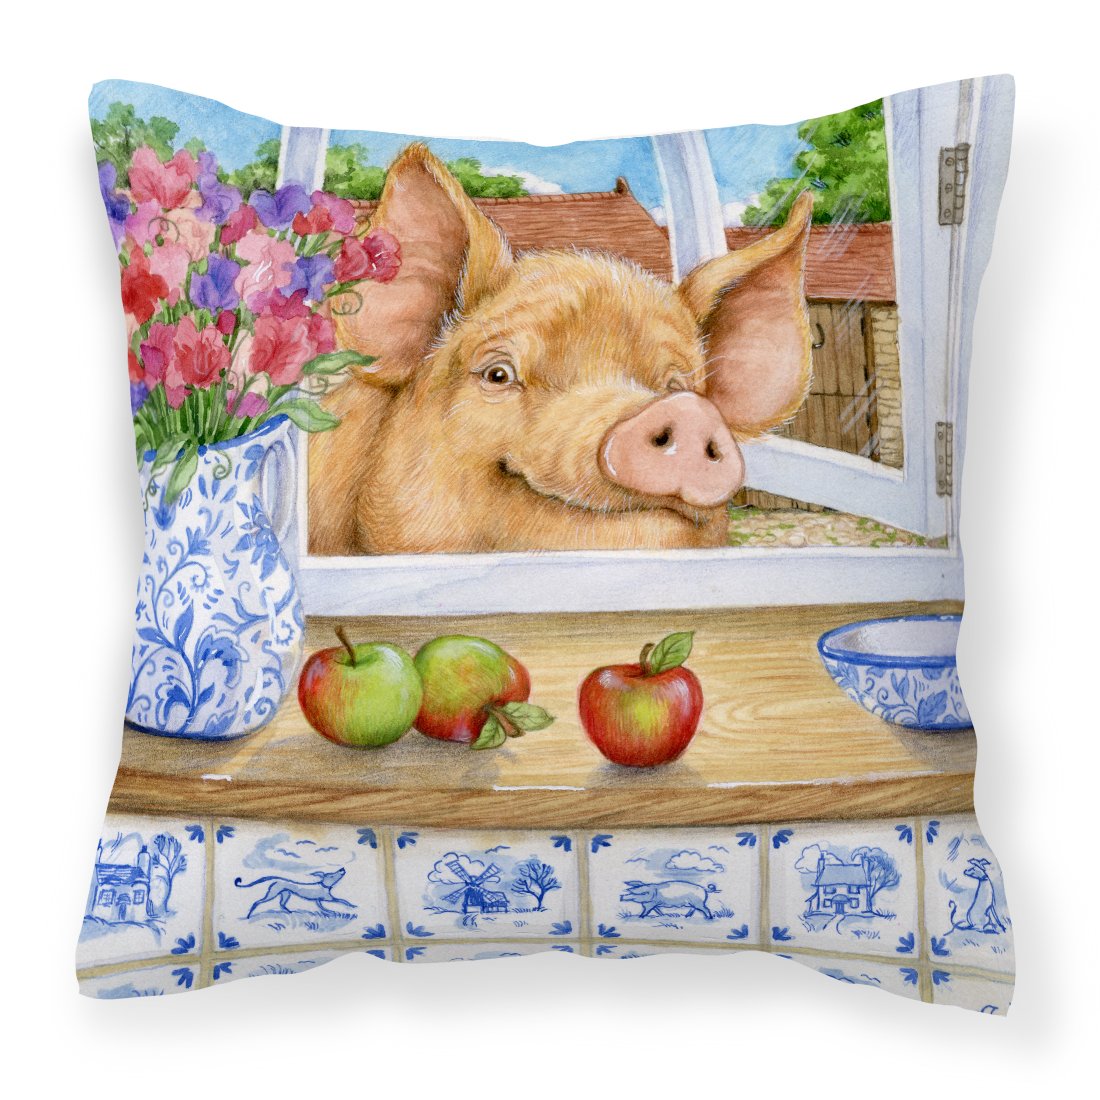 Pig trying to reach the Apple in the Window Canvas Decorative Pillow by Caroline's Treasures